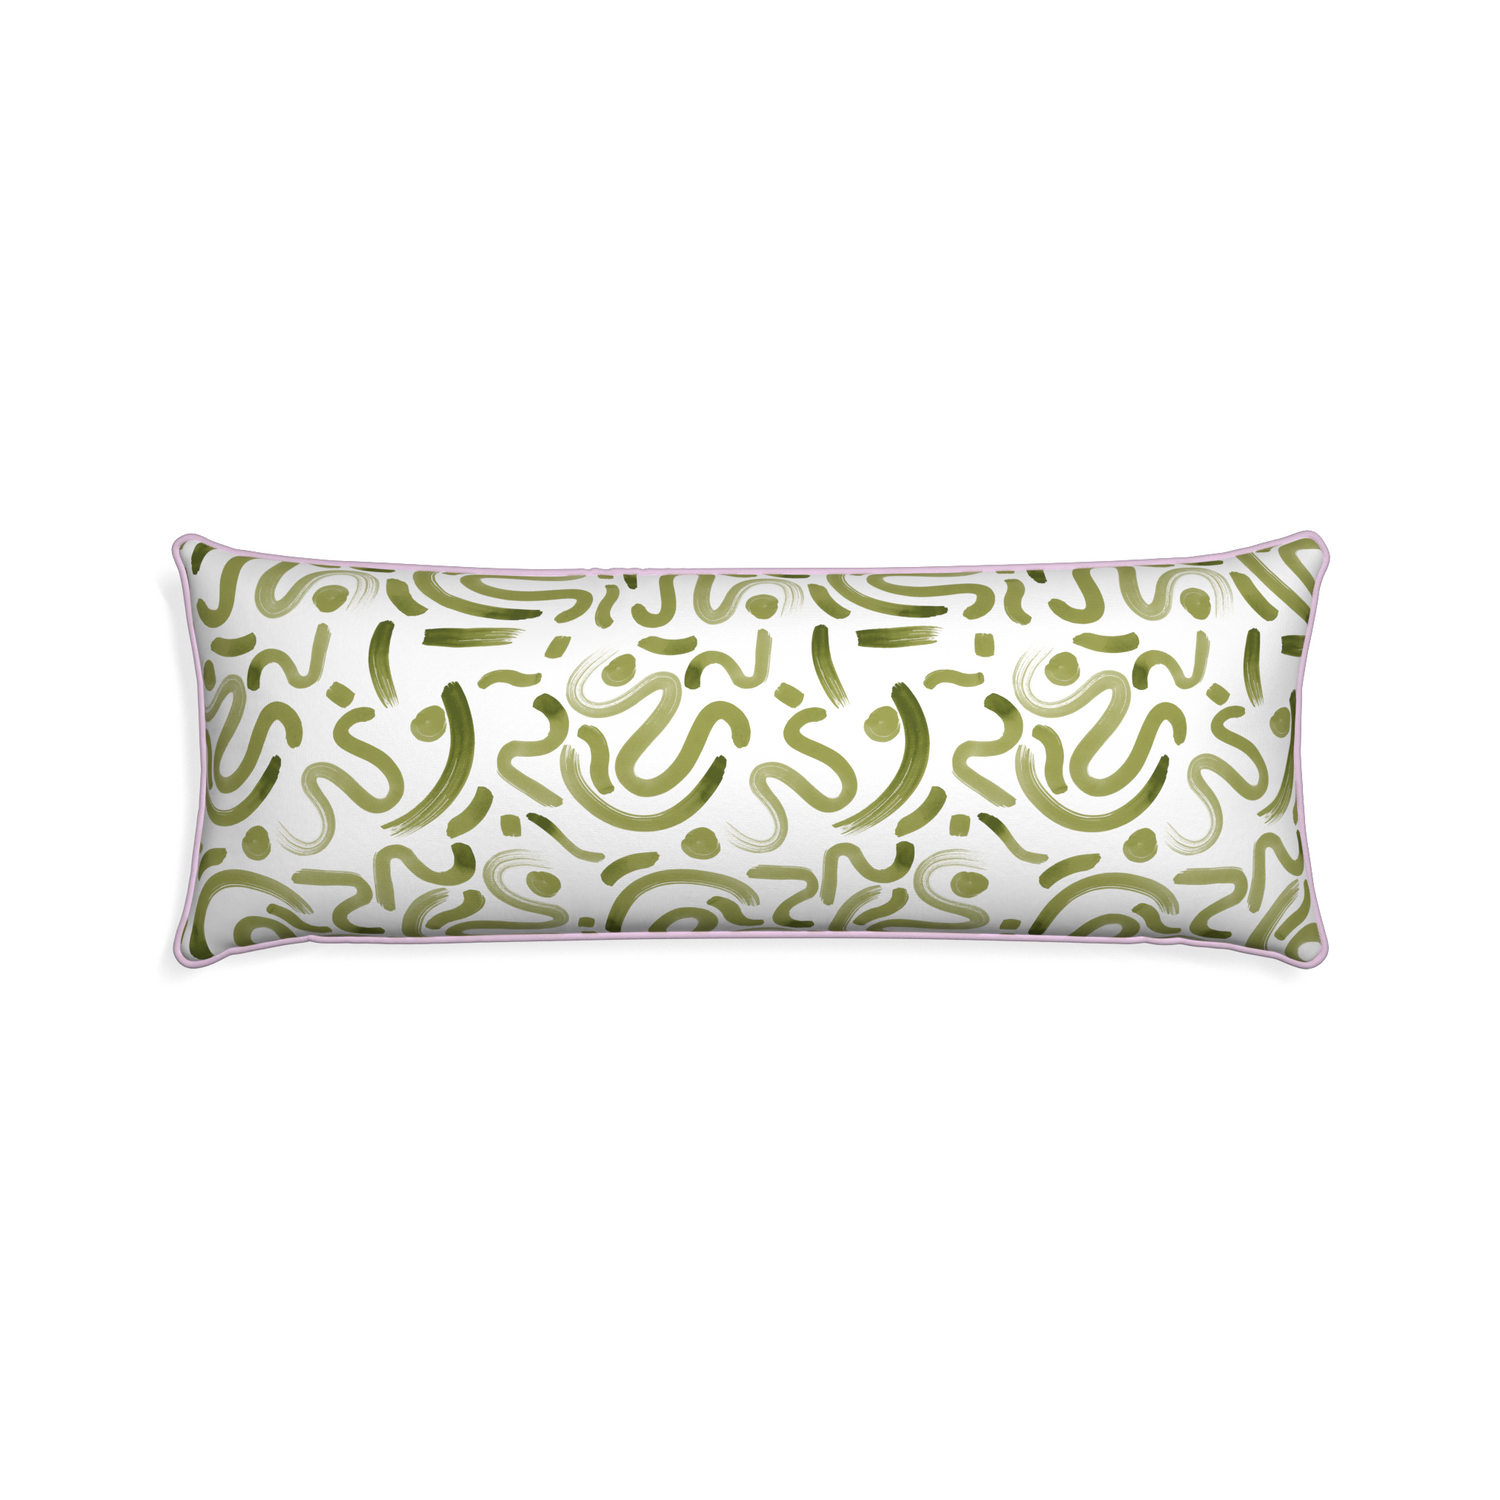 Xl-lumbar hockney moss custom pillow with l piping on white background